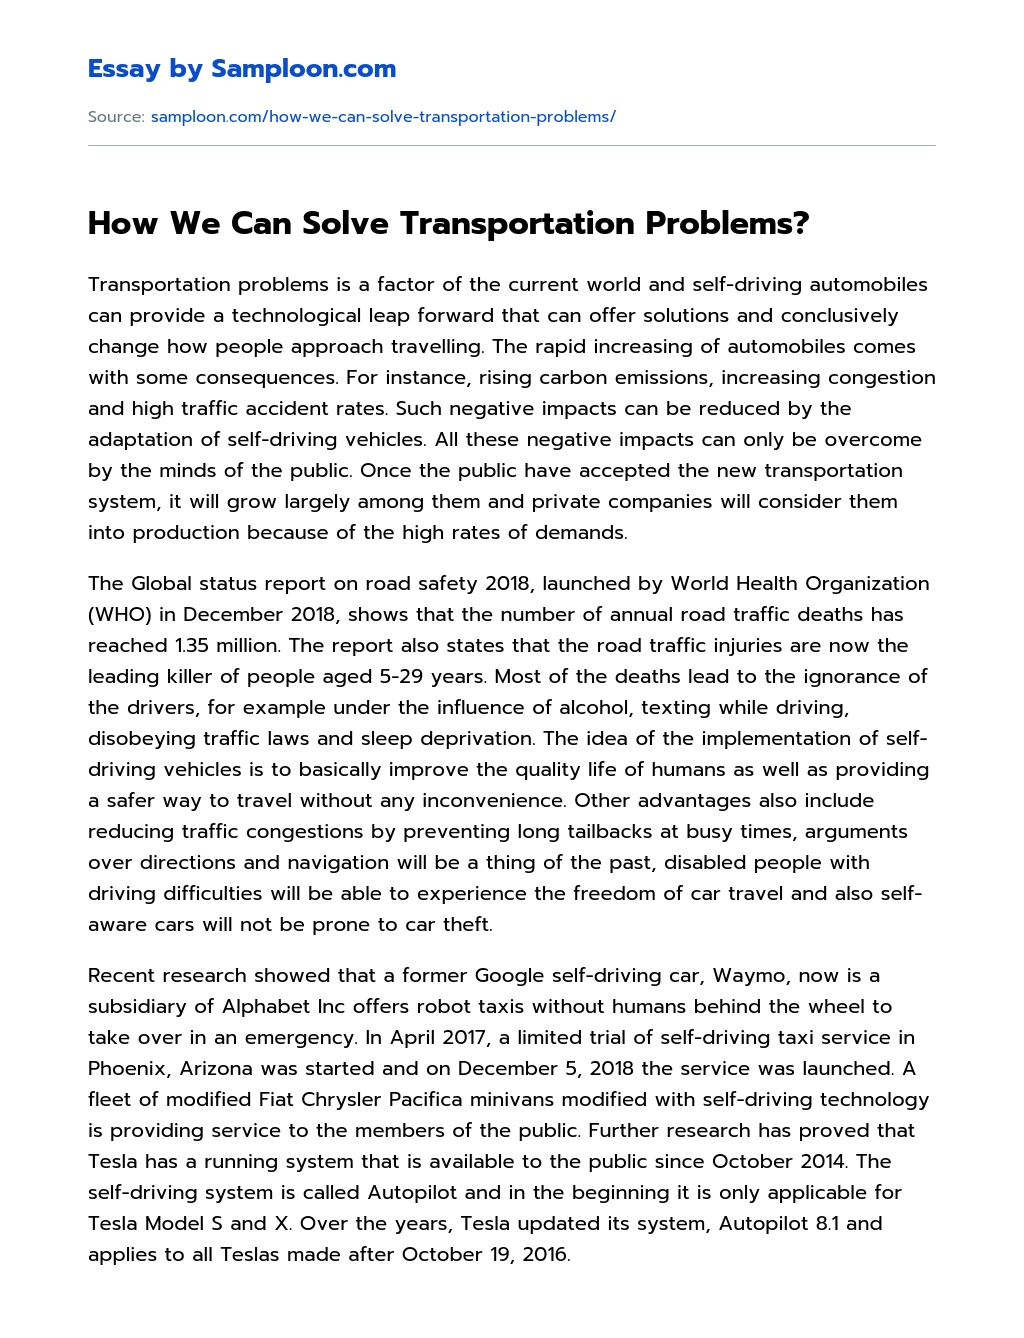 How We Can Solve Transportation Problems? essay